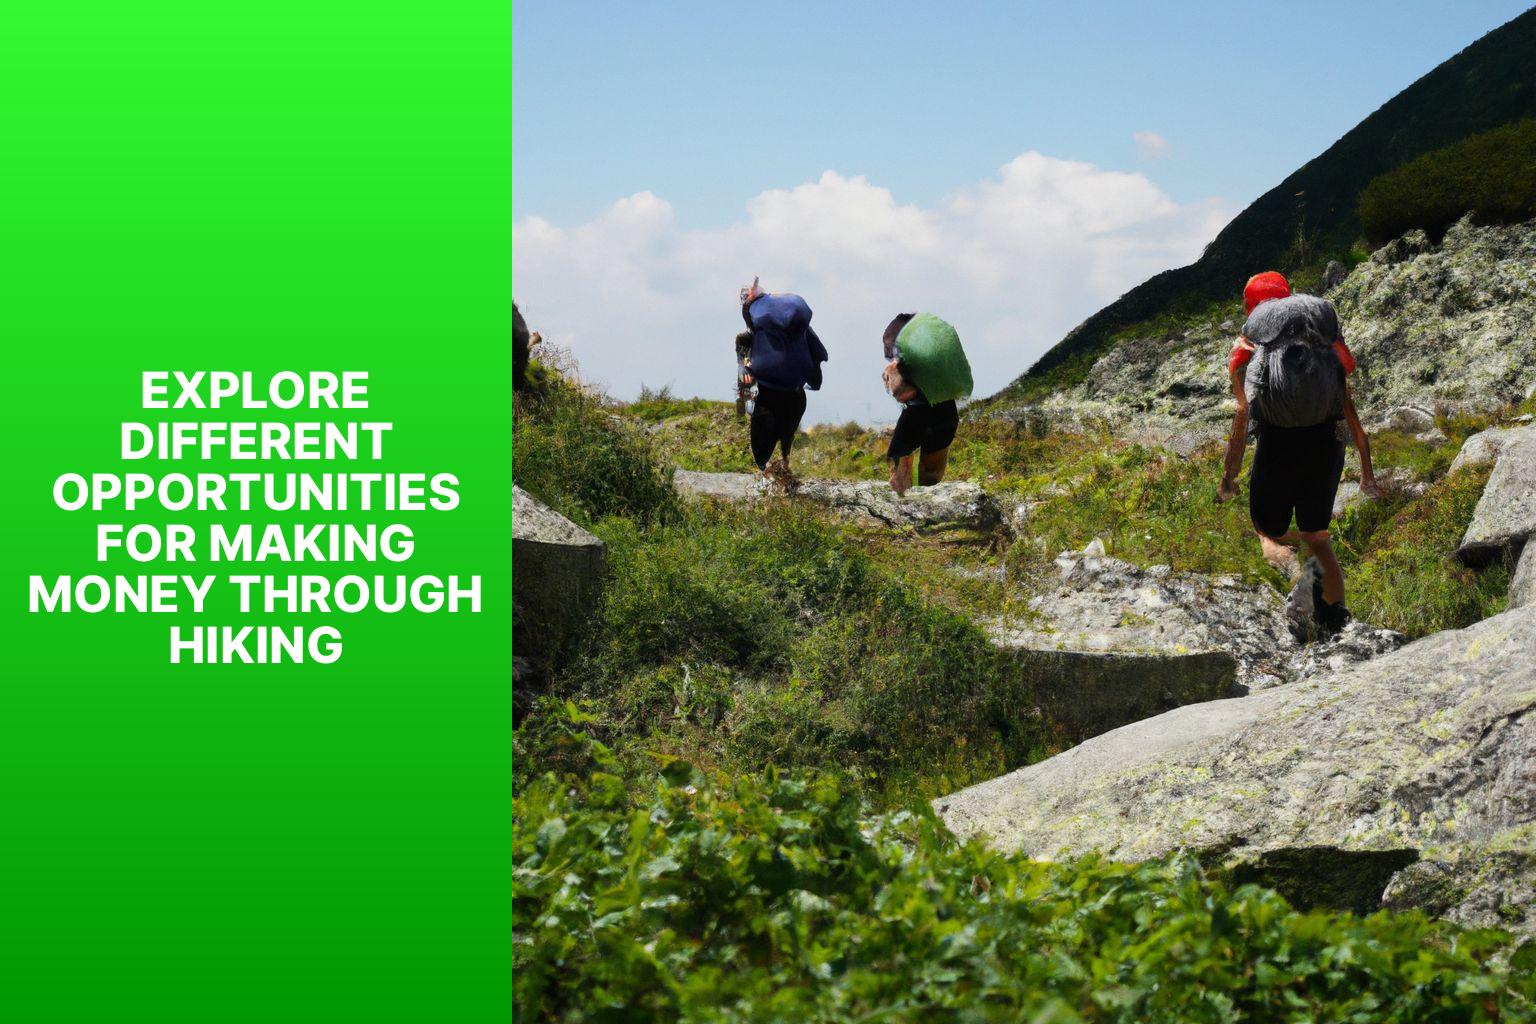 Explore Different Opportunities for Making Money through Hiking - How to Make Money Hiking 